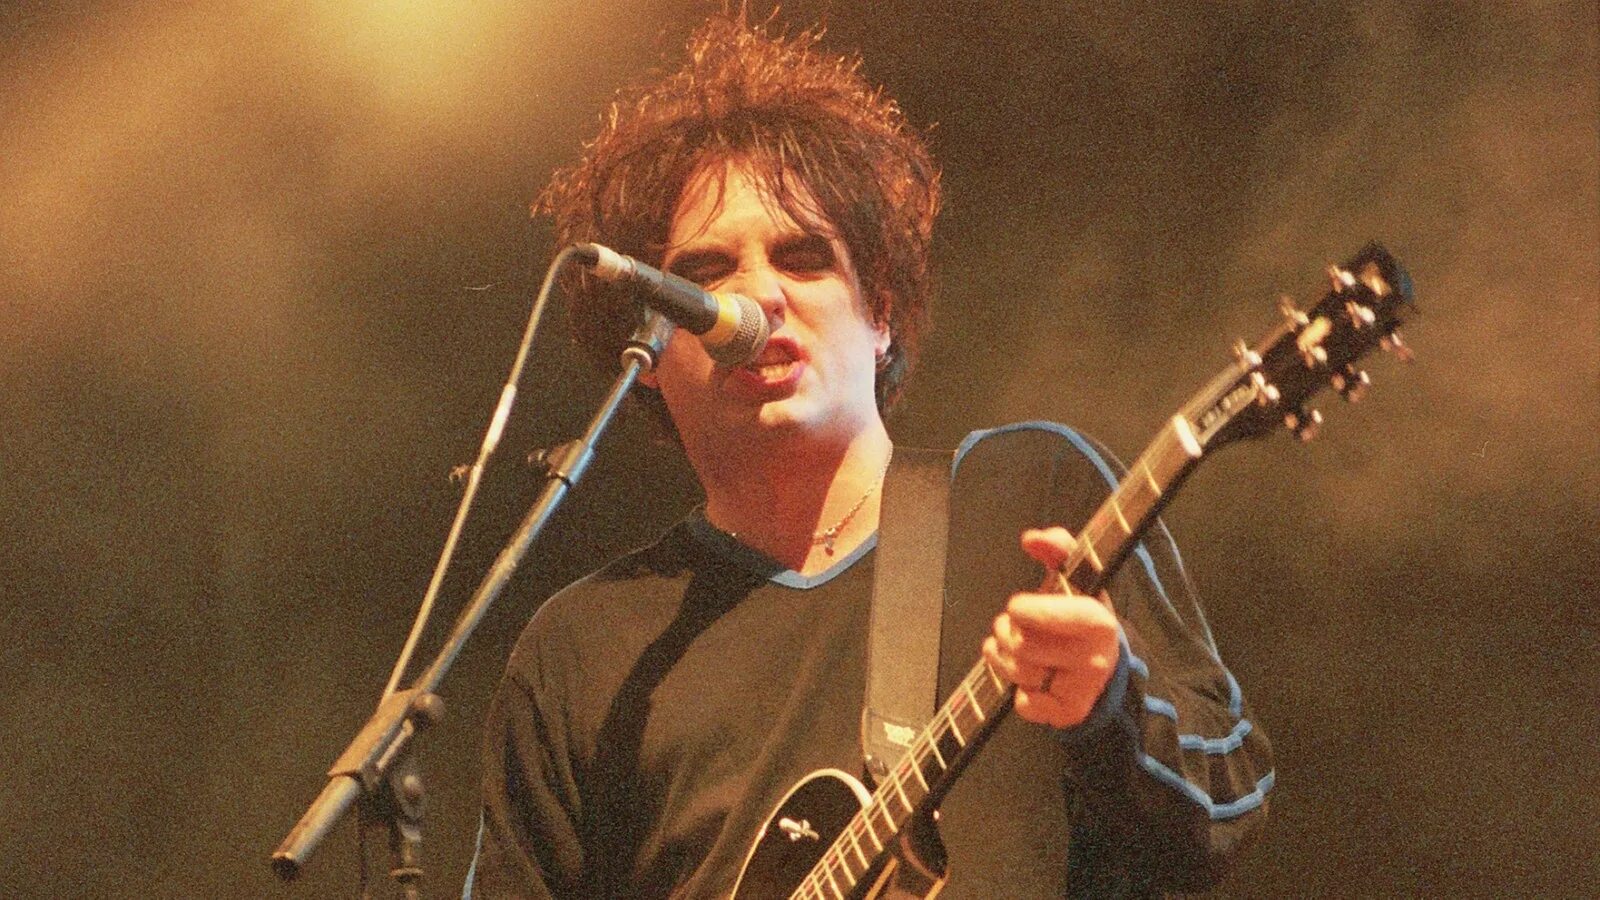 The cure forest. Басист Cure. The Cure Live. Басист из the Cure.